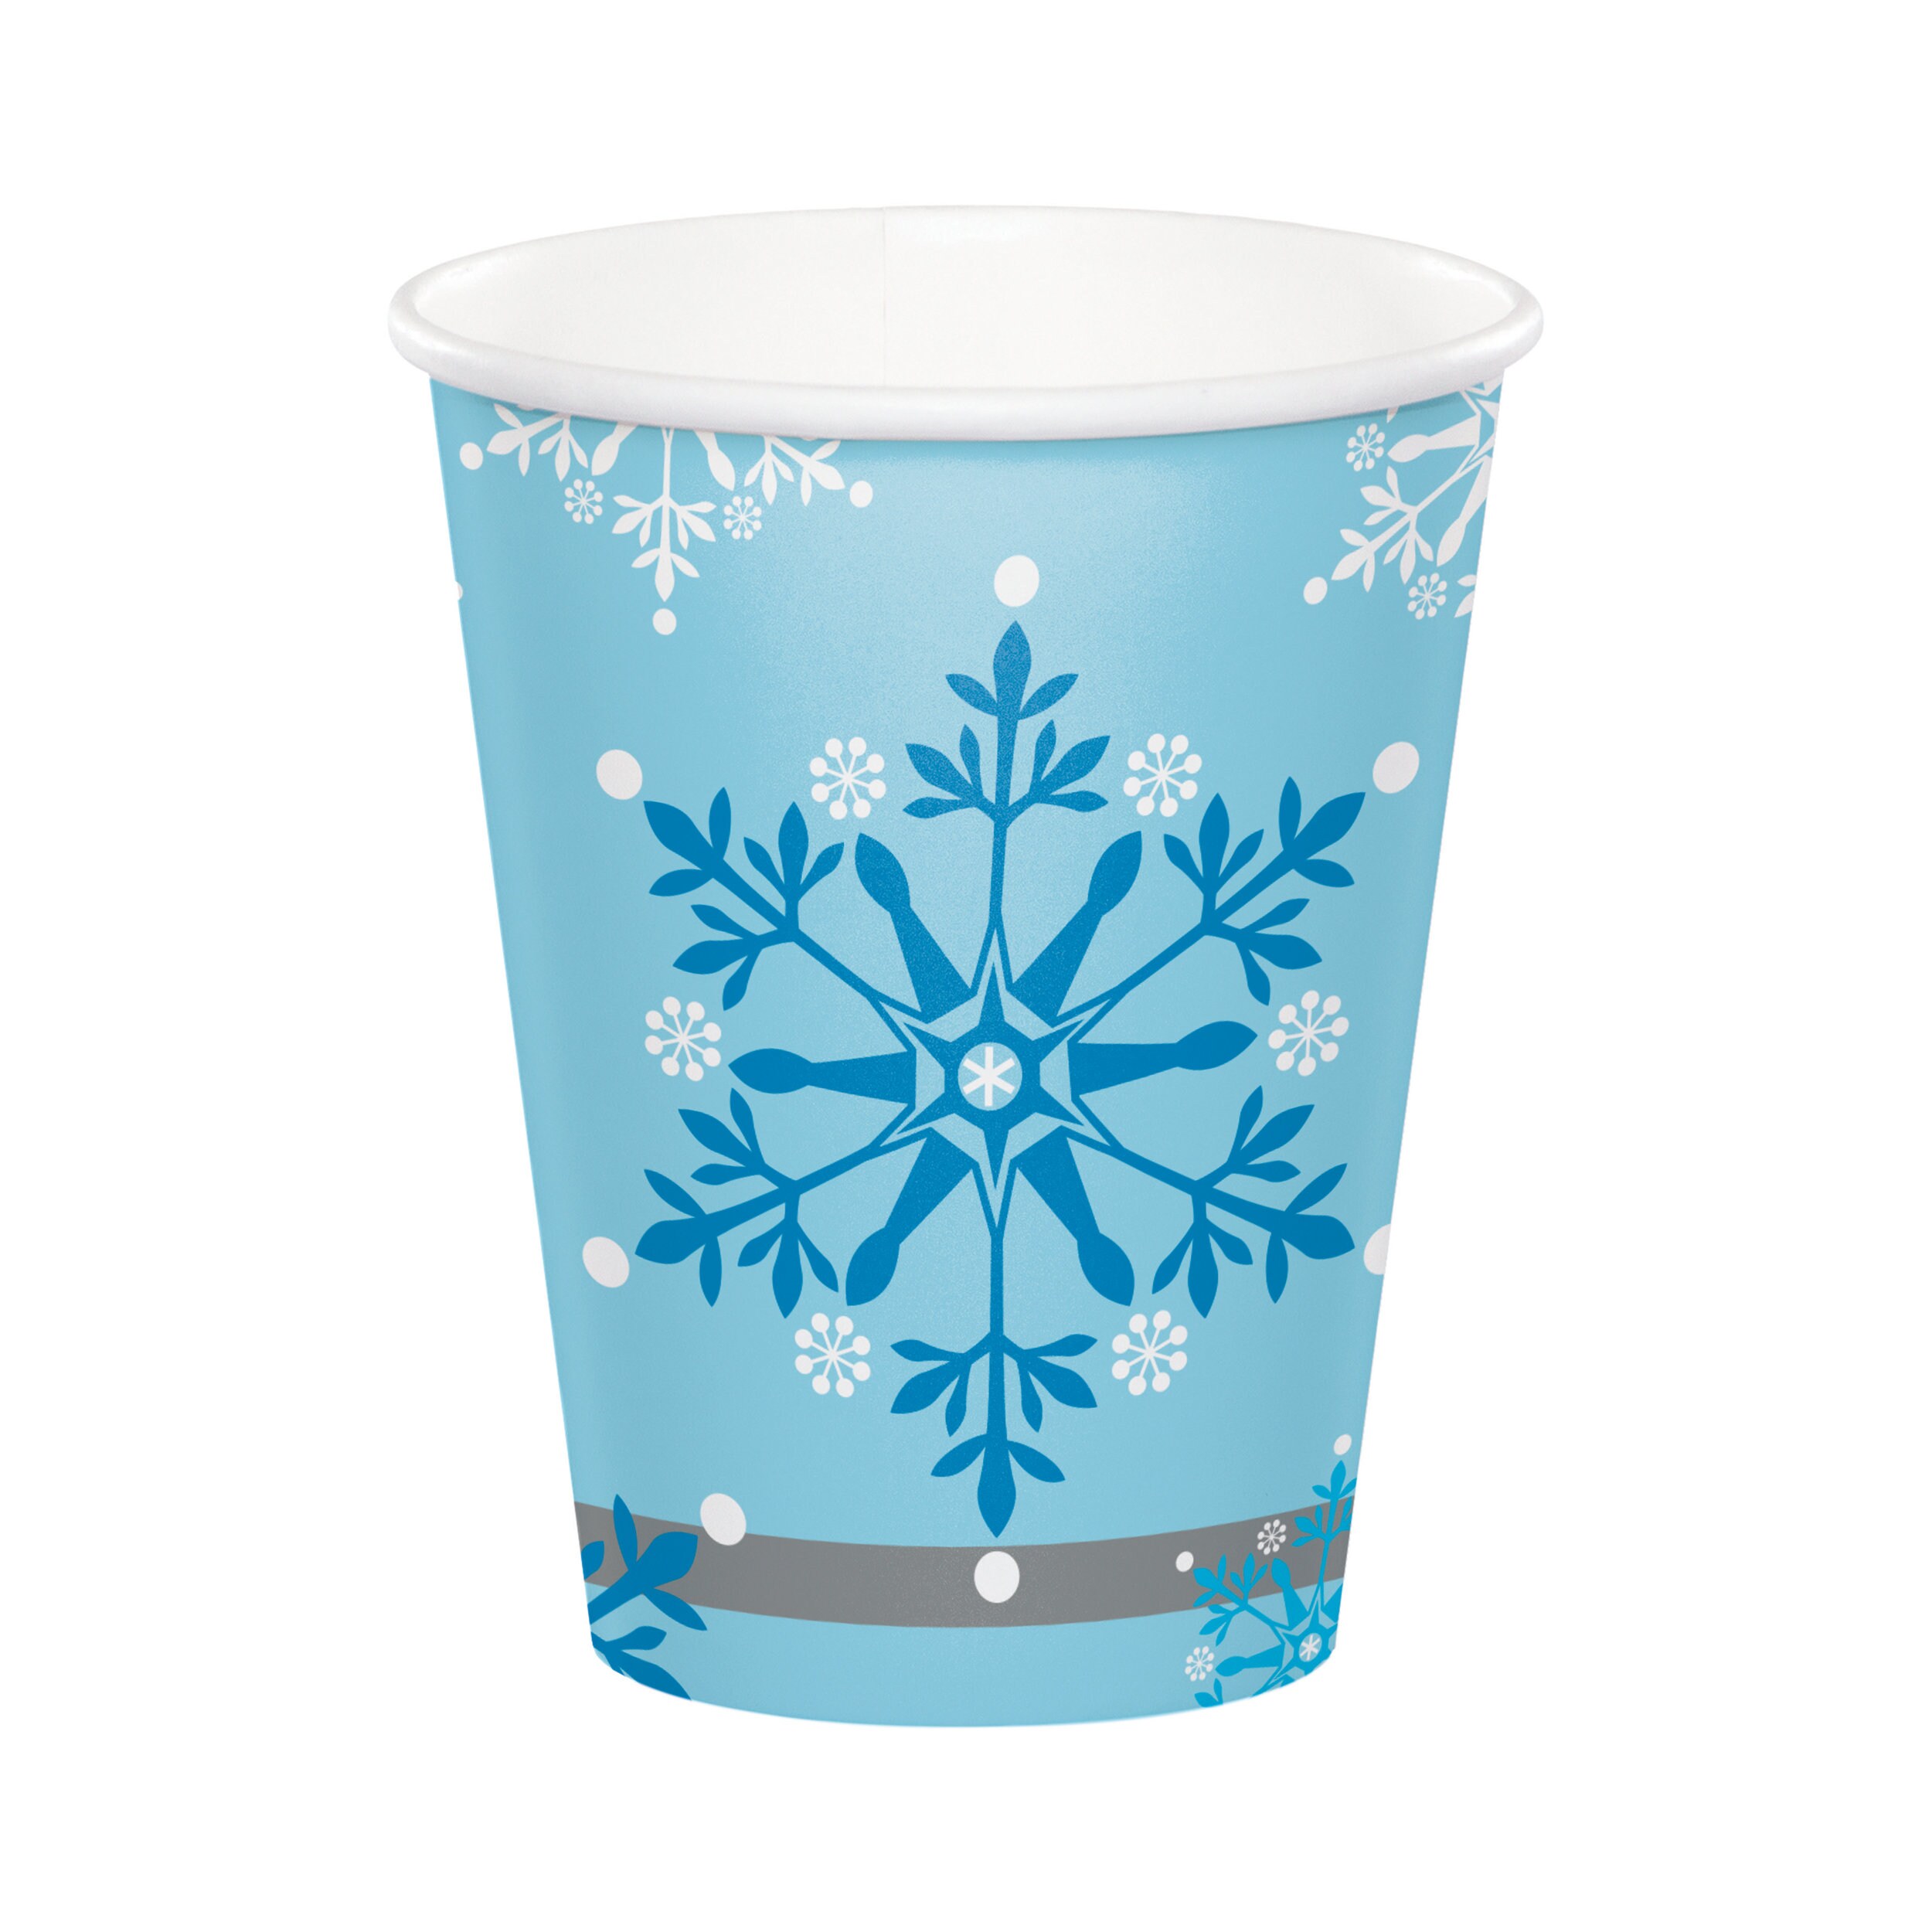 Snowflake Paper Cups - Etsy